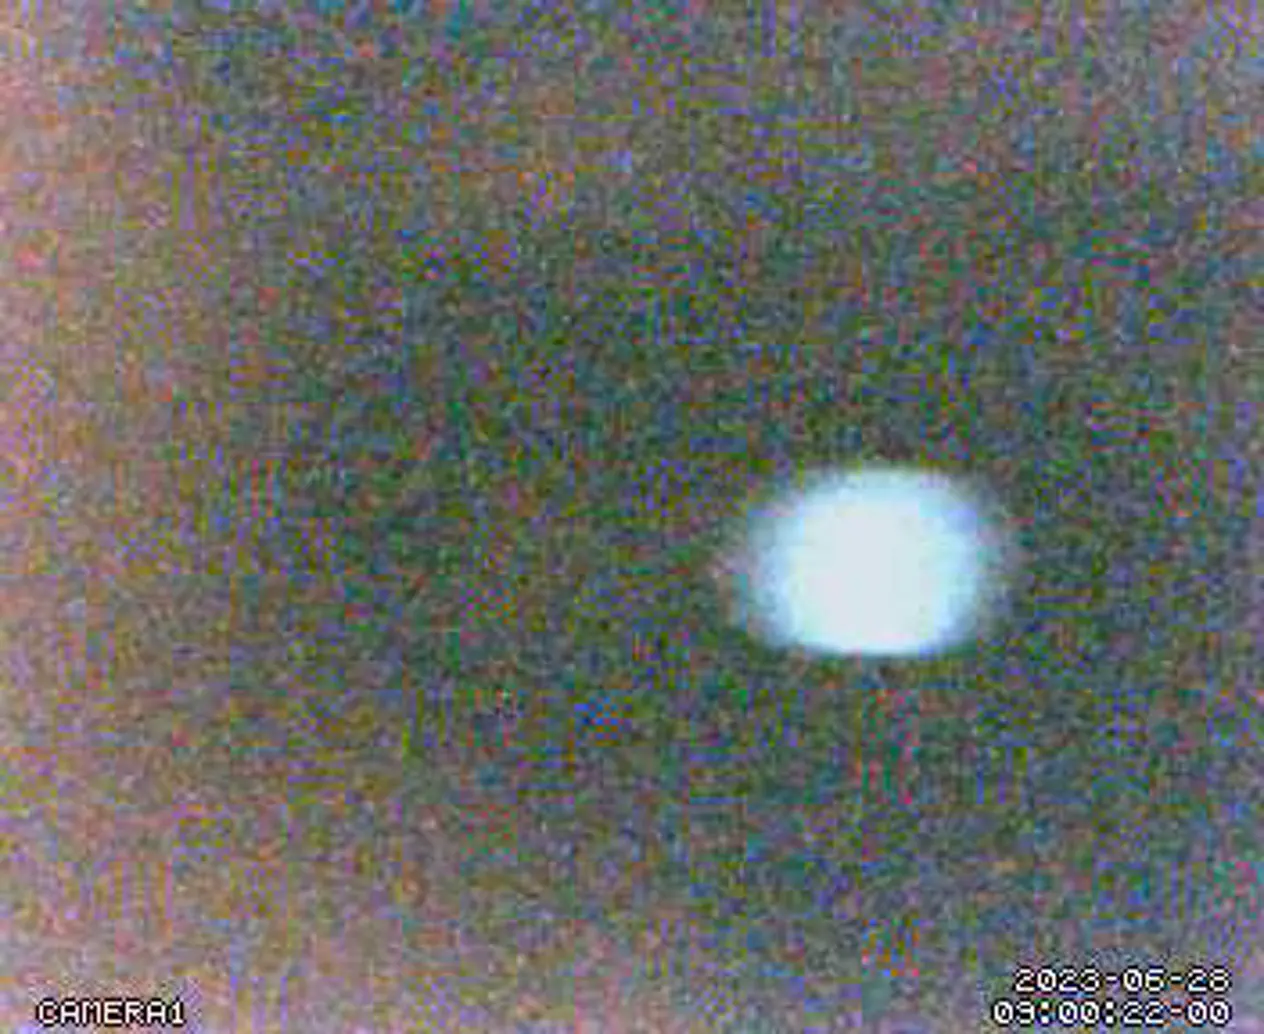 A blurry image from the webcam